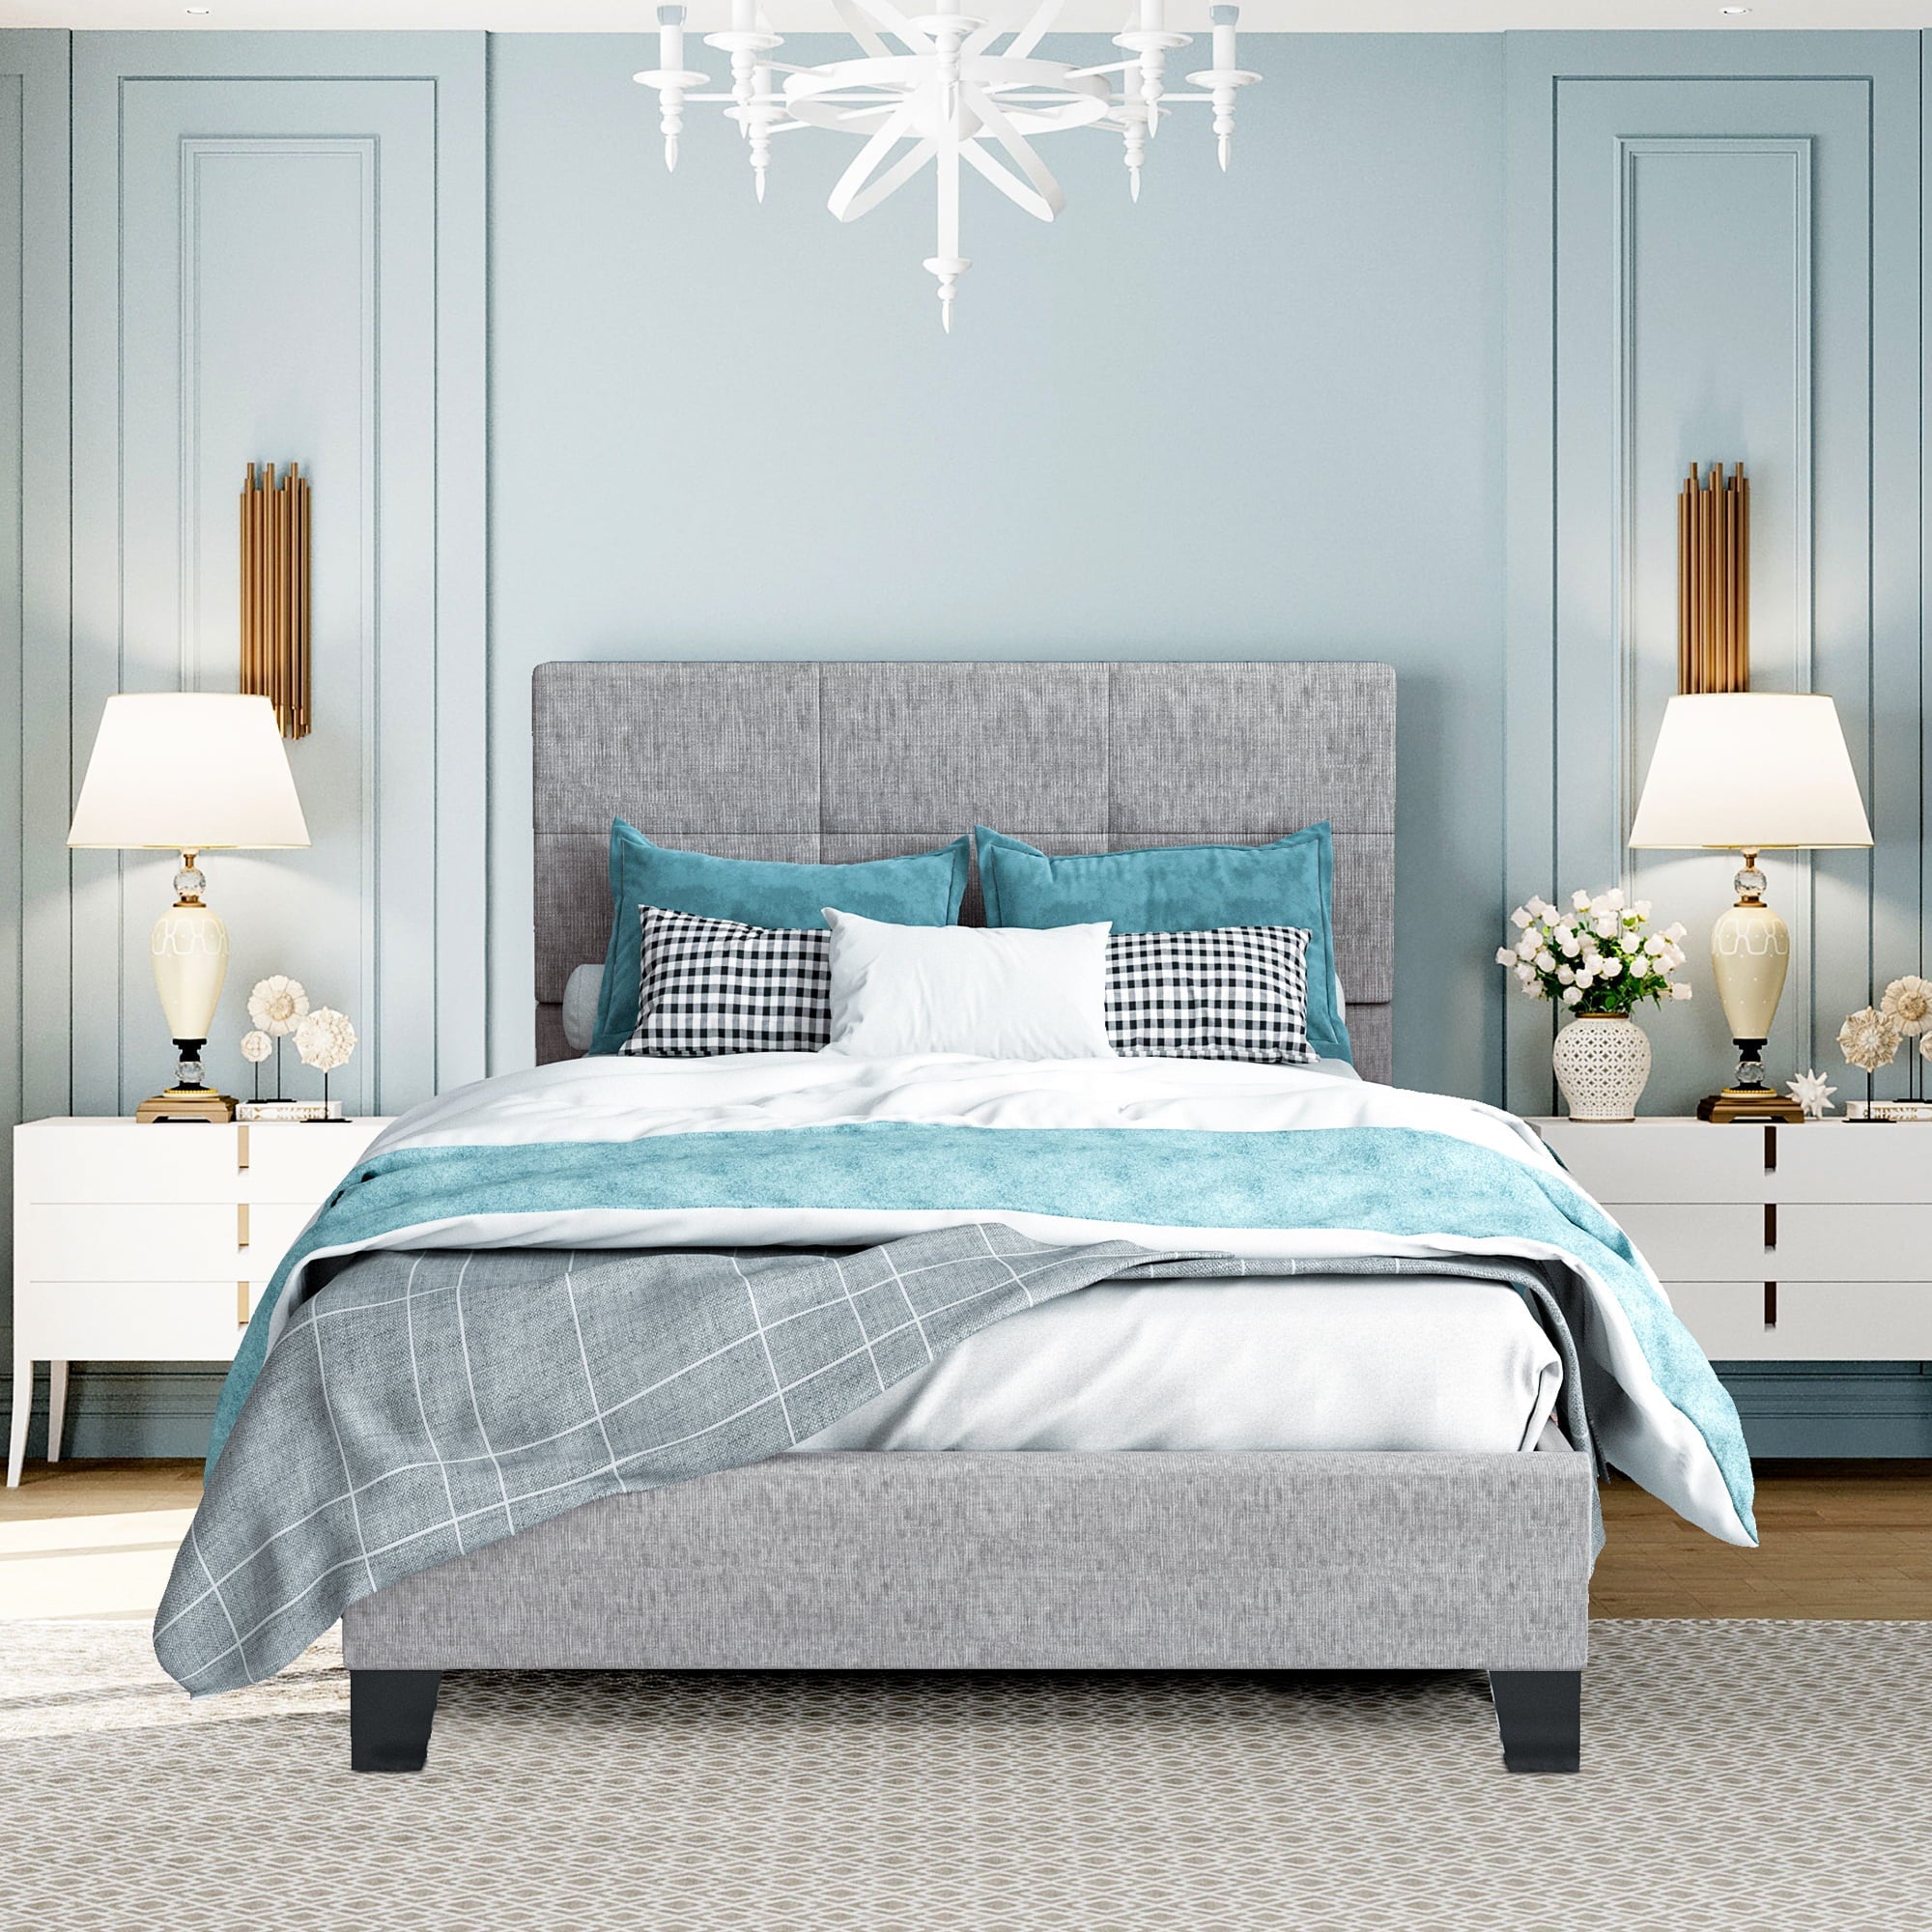 uhomepro Upholstered Tufted Fabric Platform Twin Bed Frame with Upholstered Headboard, No Box Spring Needed, Gray